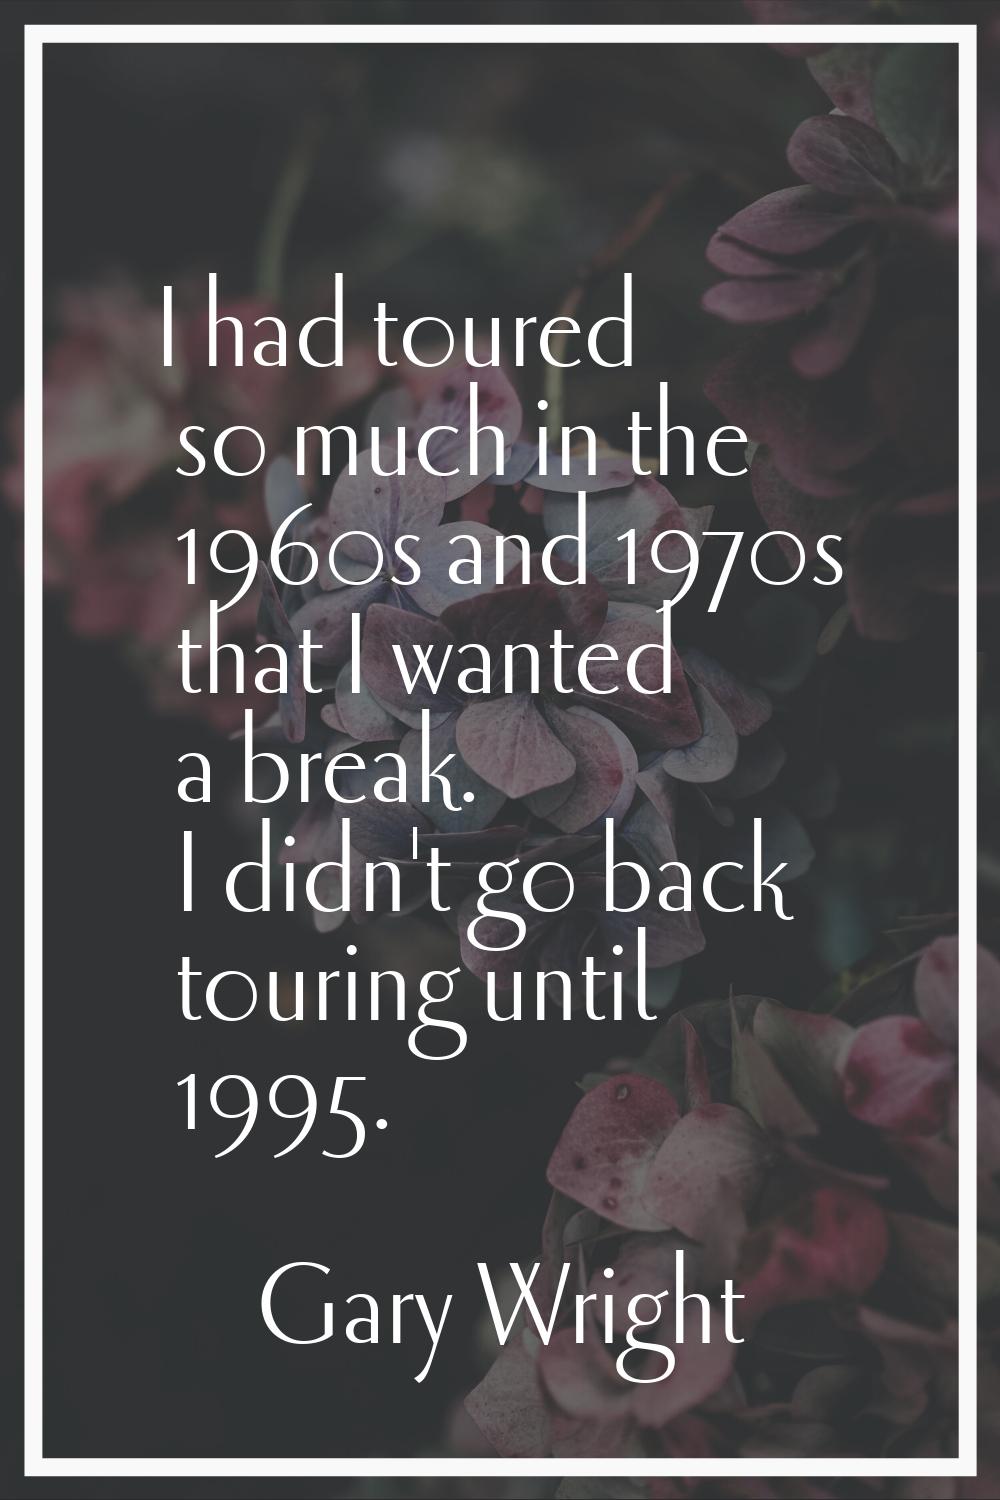 I had toured so much in the 1960s and 1970s that I wanted a break. I didn't go back touring until 1